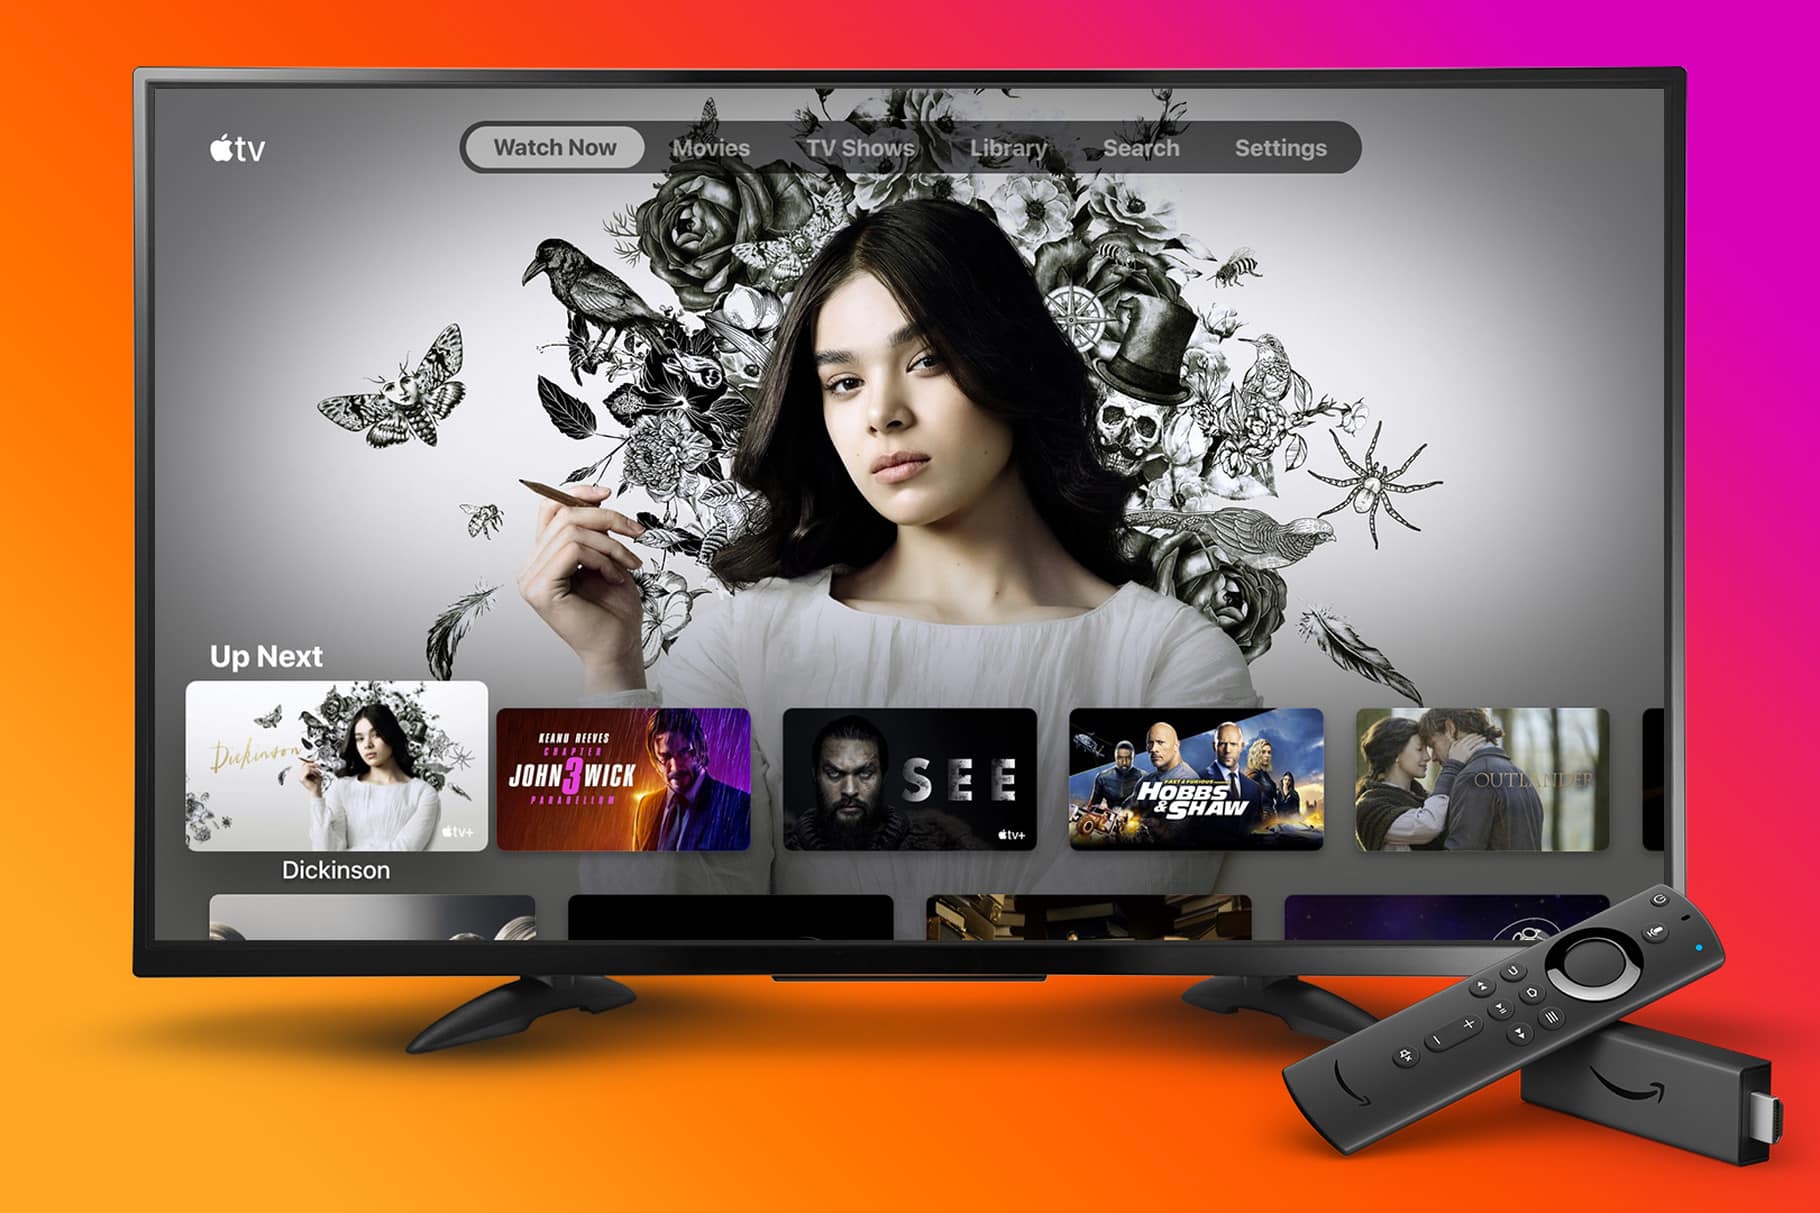 Apple TV app is now available on Amazon Fire TV devices